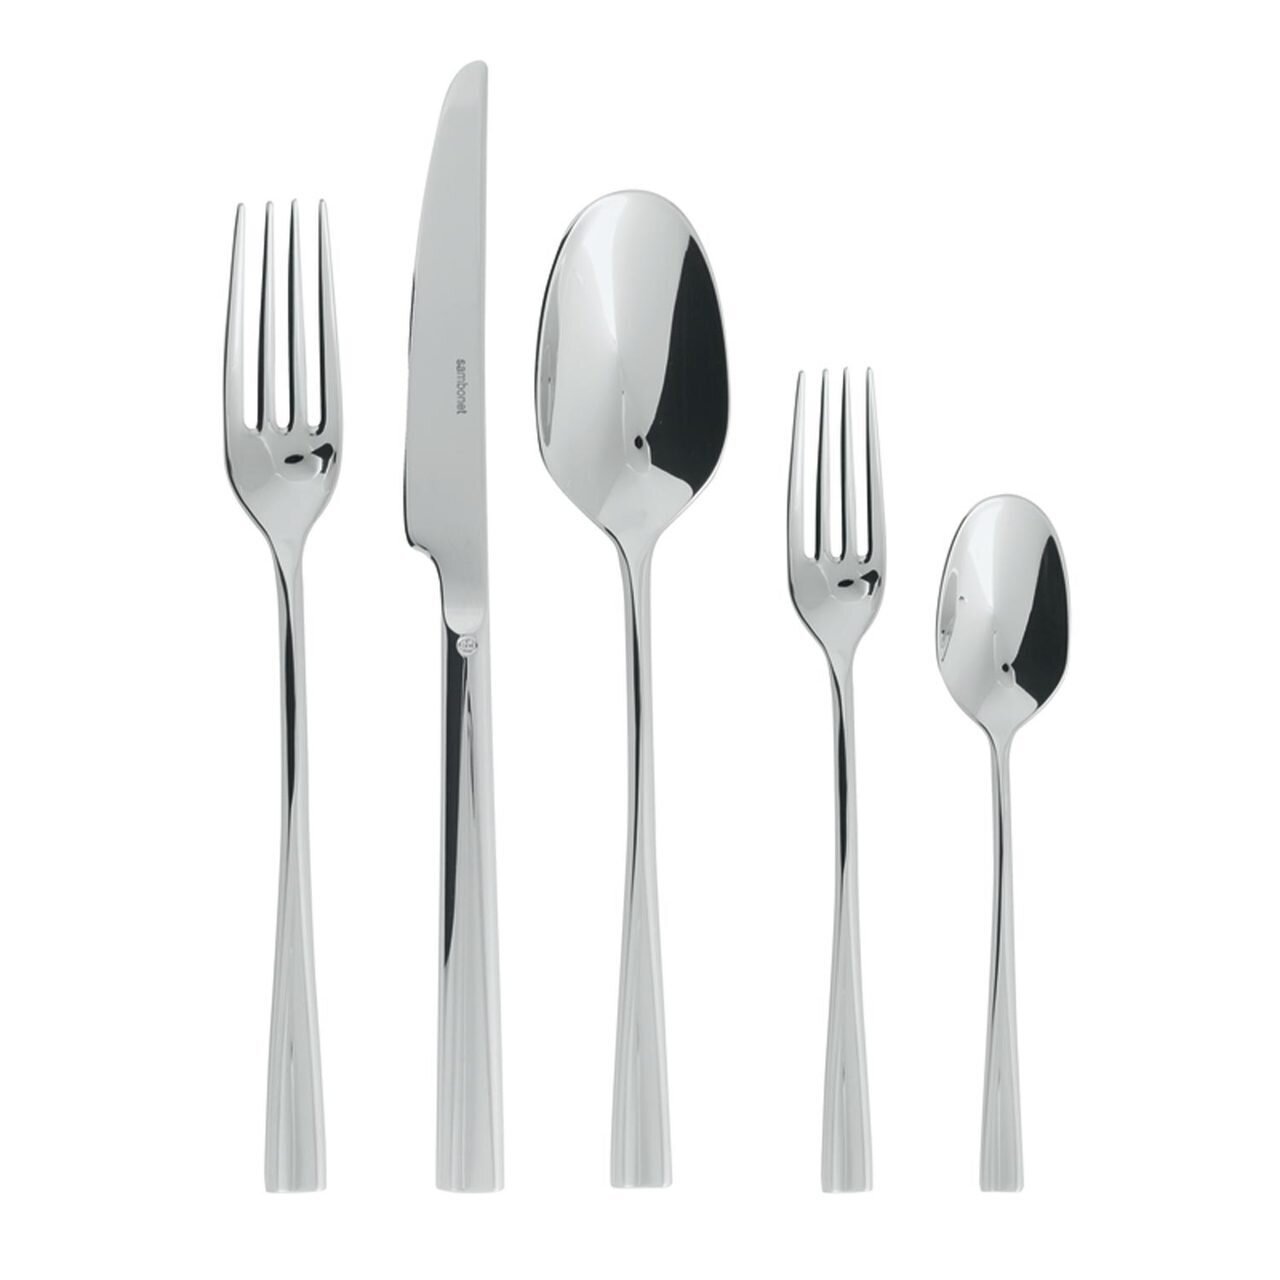 Sambonet Even 5 Piece Place Setting Solid Handle 52537-93